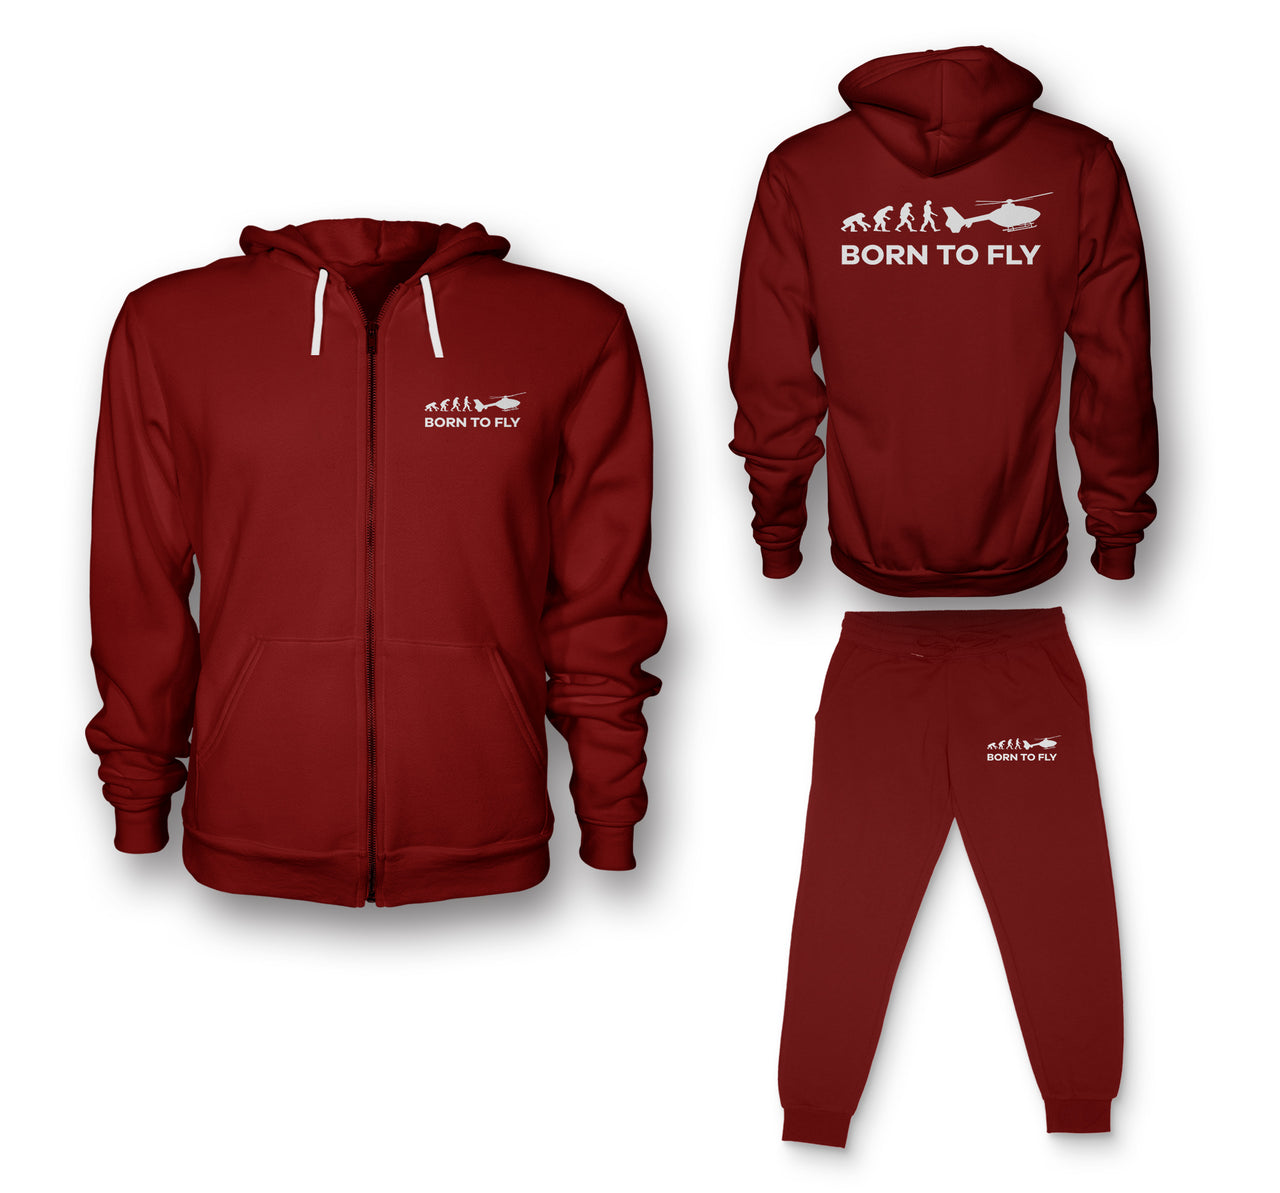 Born To Fly Helicopter Designed Zipped Hoodies & Sweatpants Set